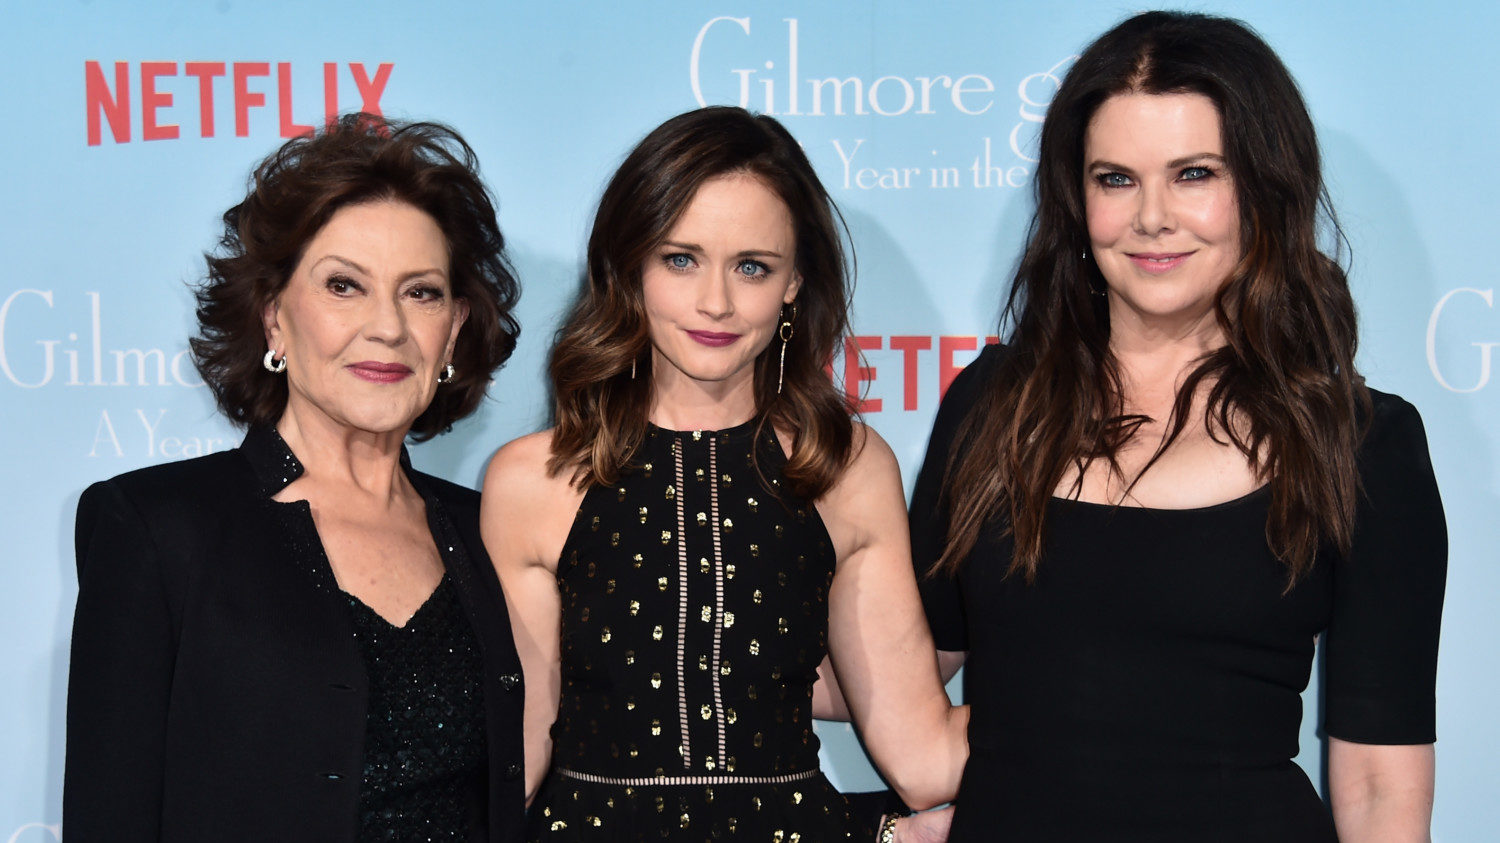 Premiere Of Netflix's 'Gilmore Girls: A Year In The Life' - Arrivals